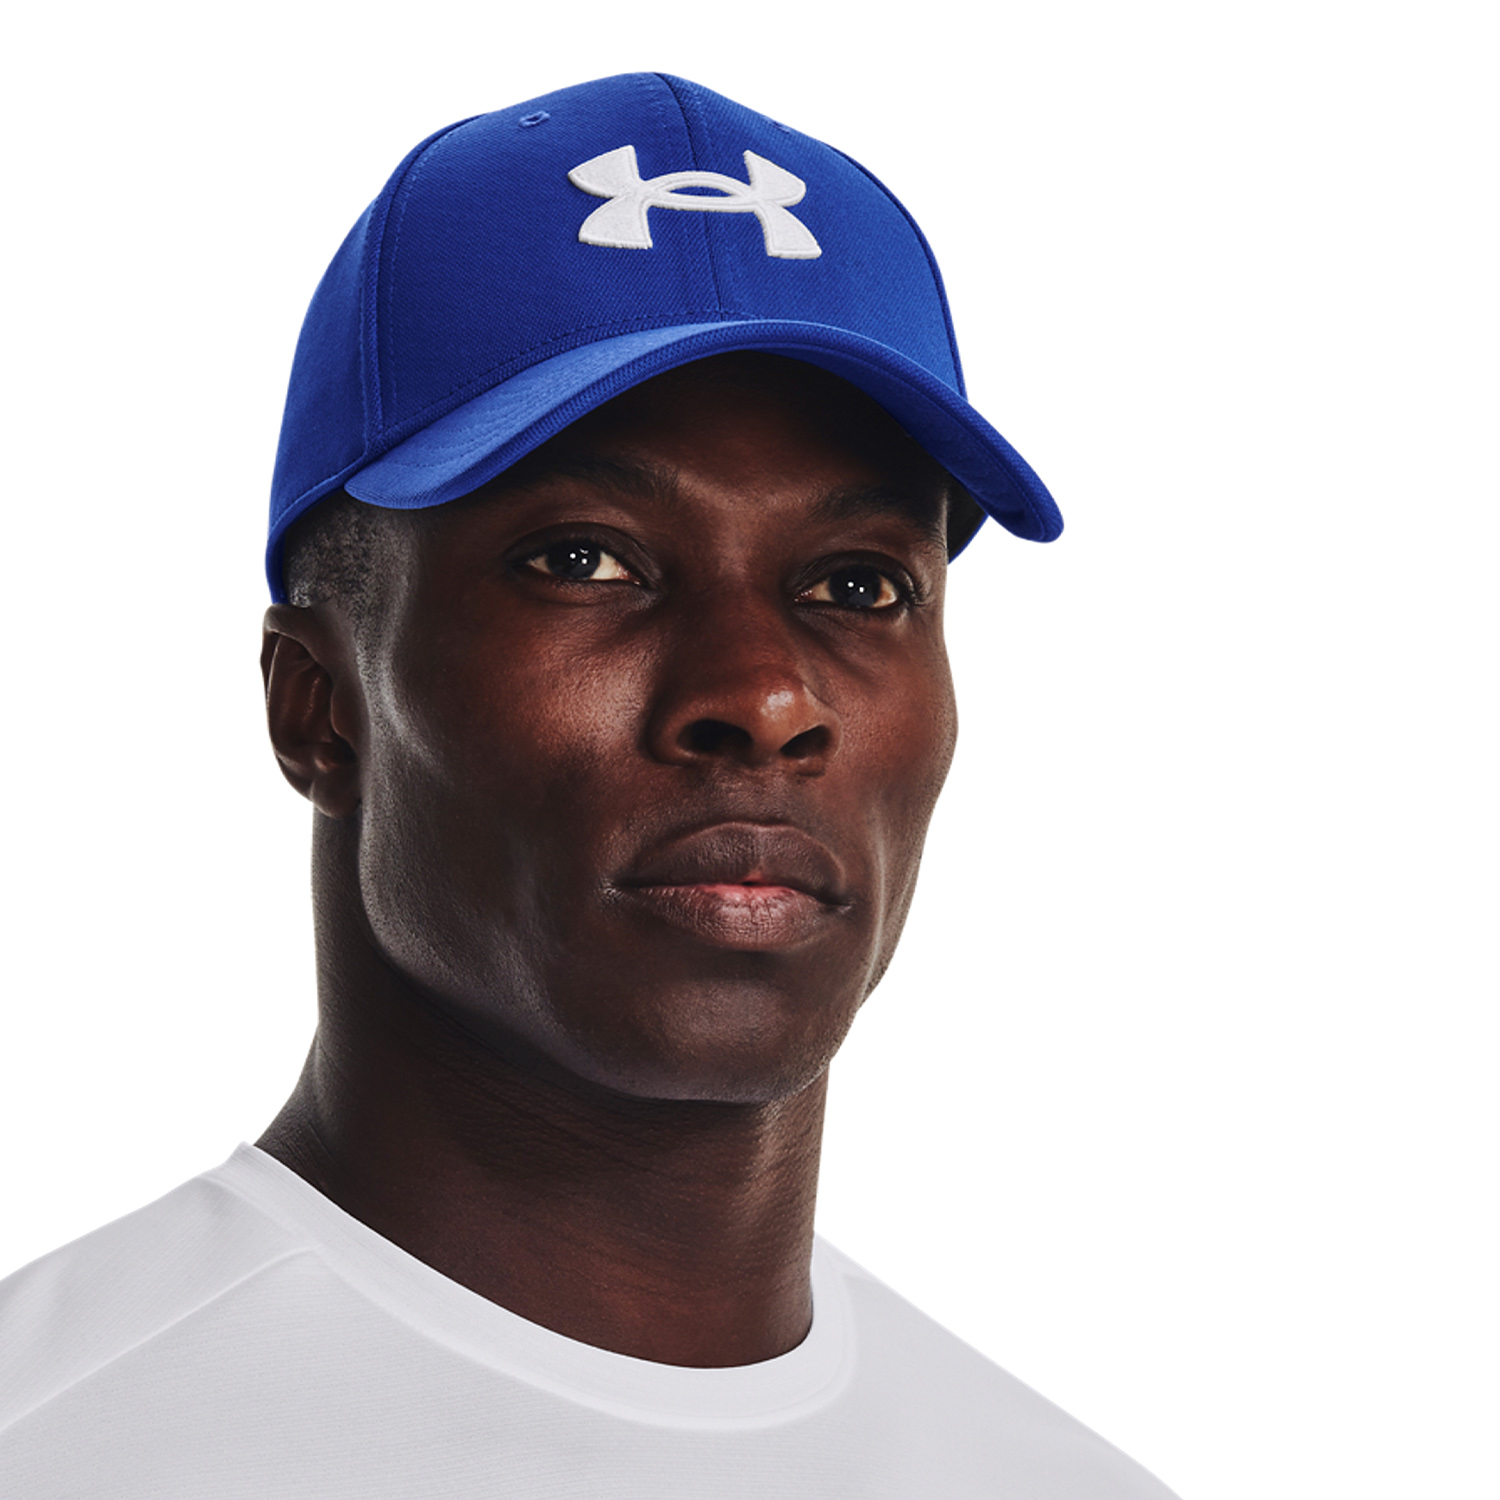 Under Armour Blitzing Cappello - Royal/White